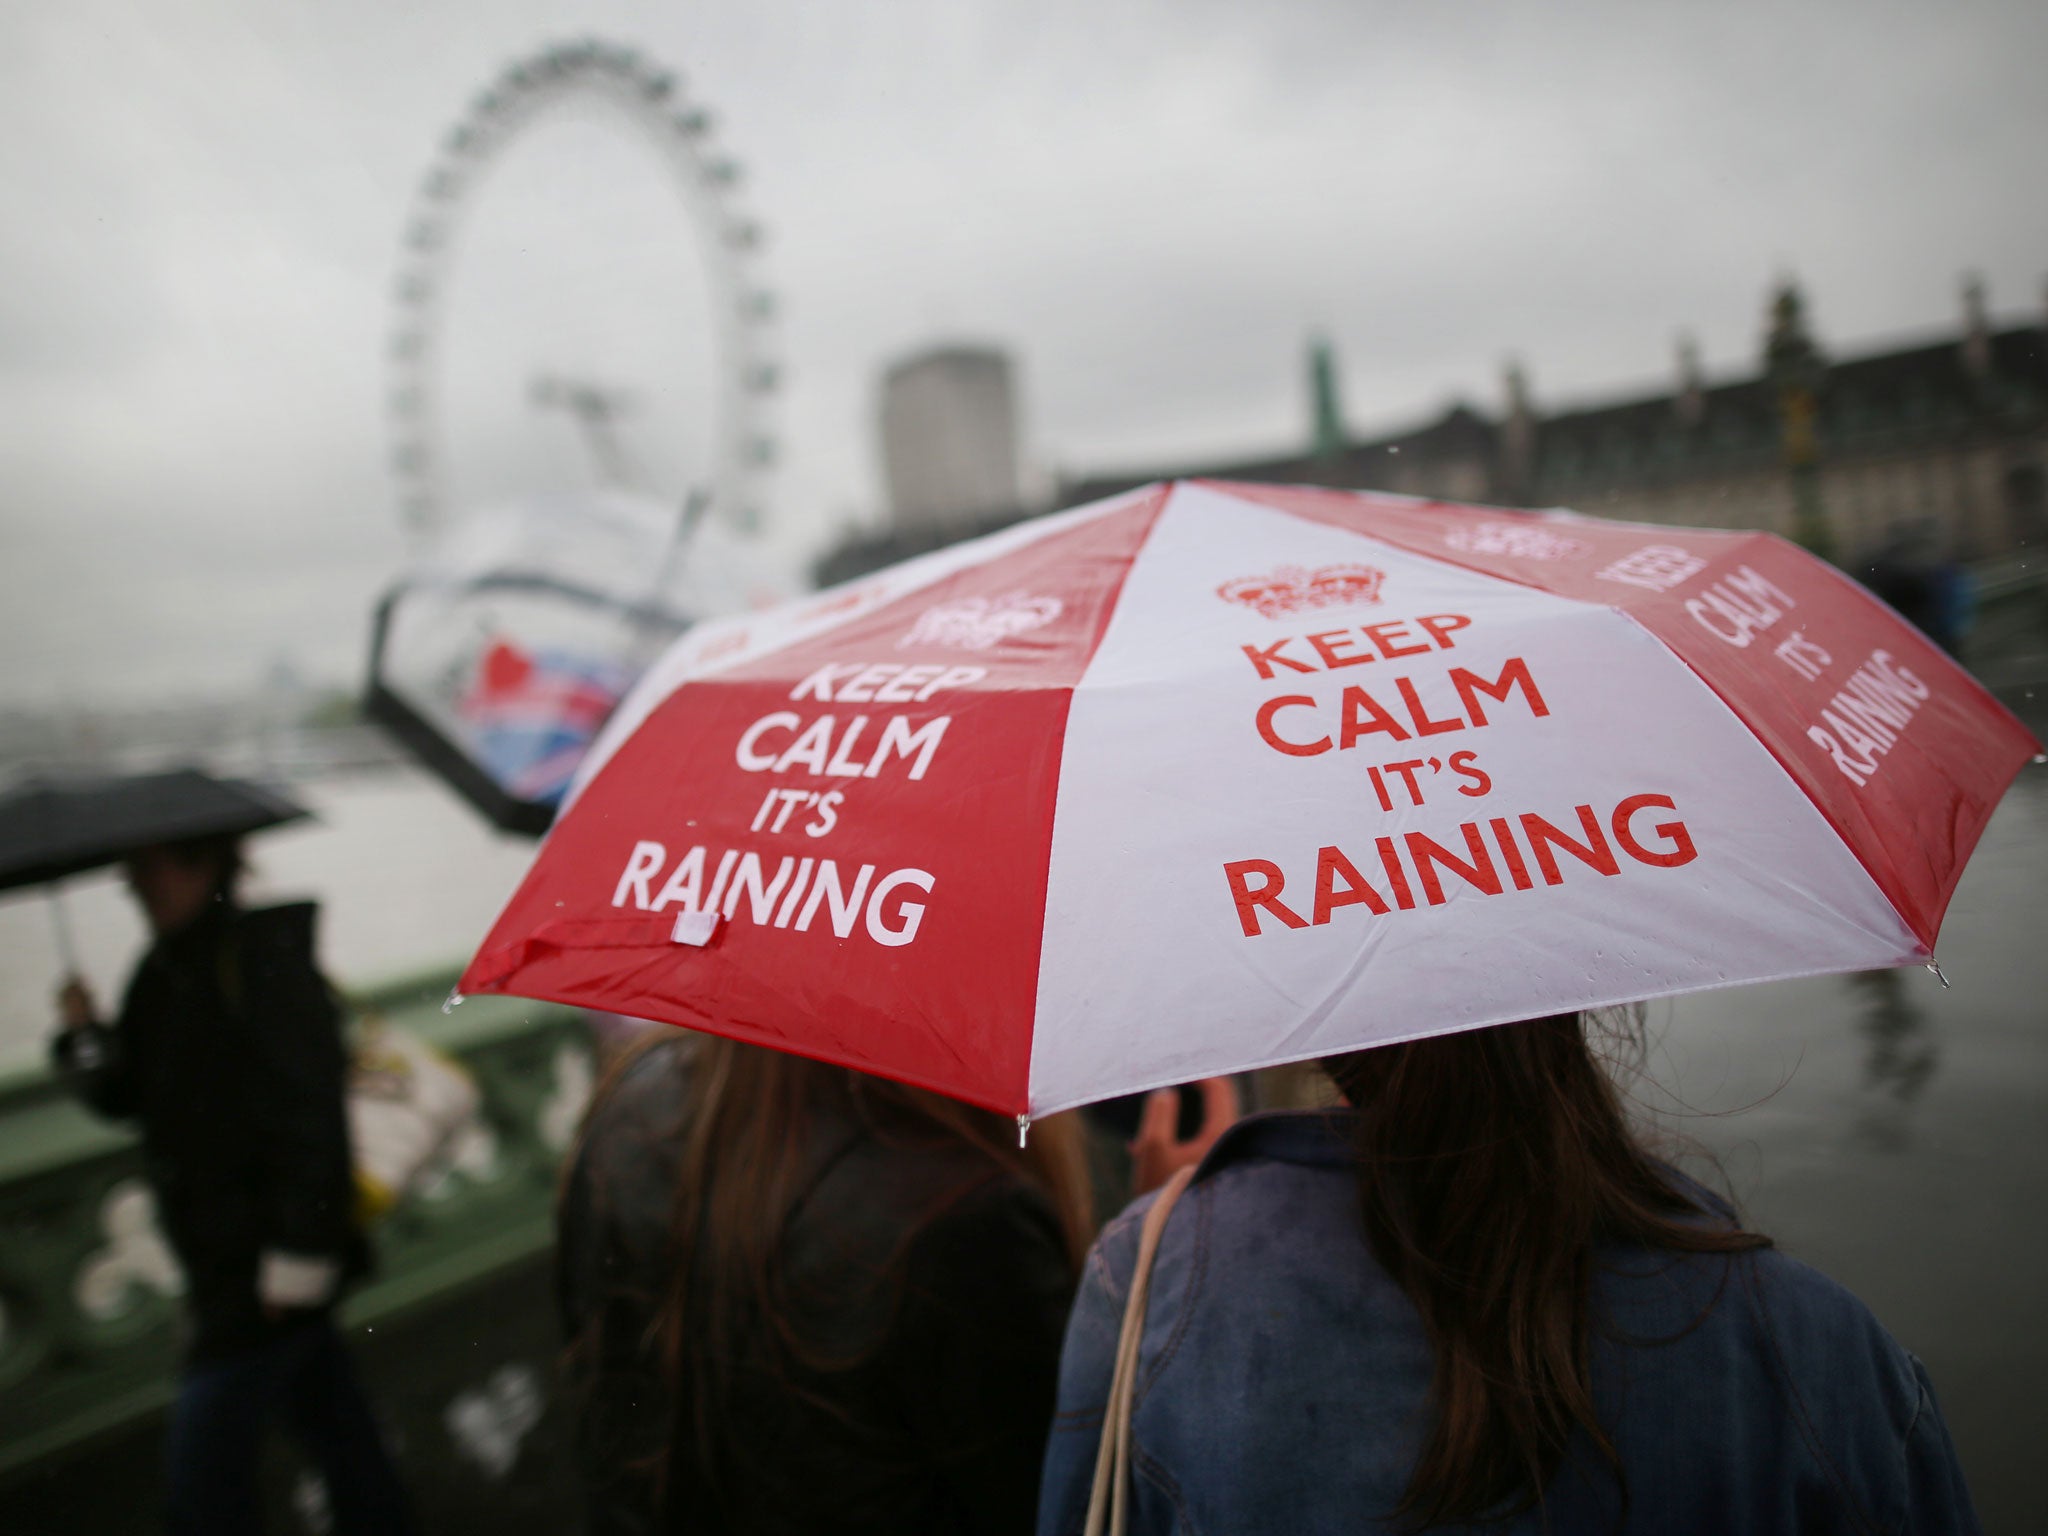 A girl carries a 'Keep calm it's raining' umbrella on Westminster Bridge on May 28, 2013 in London, England. Heavy rain is falling in London and the south east after a warm and sunny bank holiday weekend.